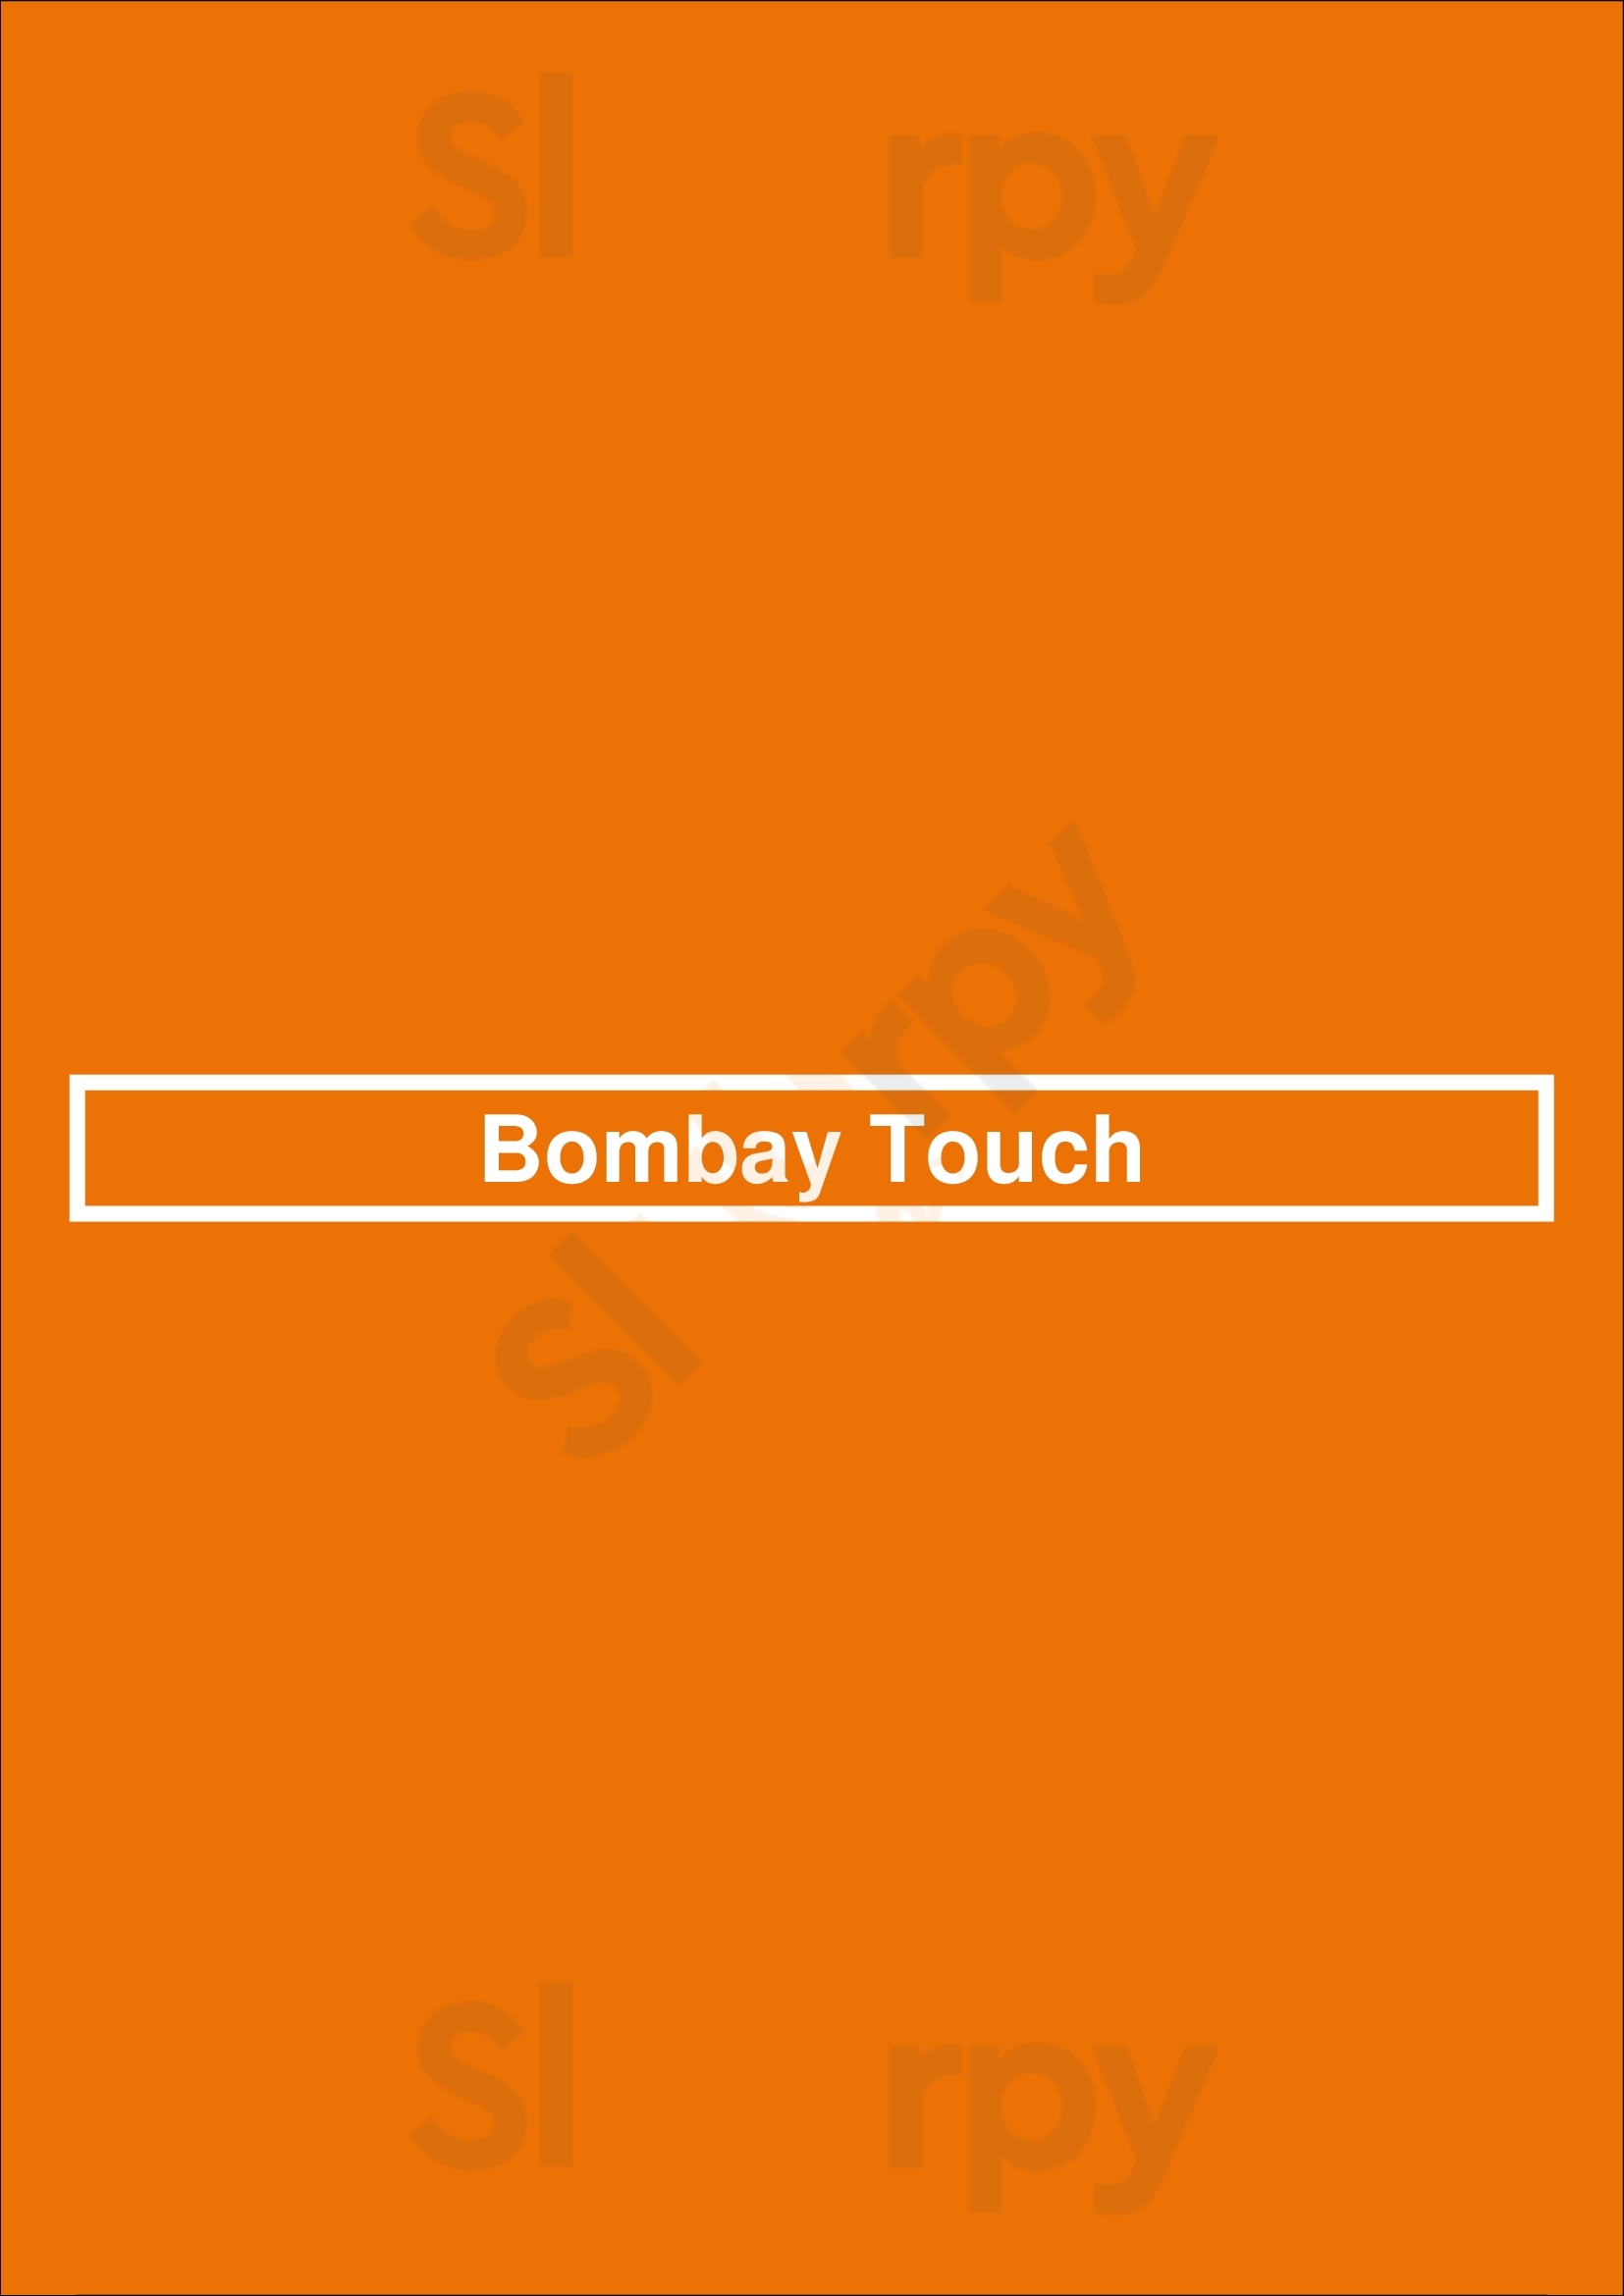 Bombay Touch Thornhill Menu - 1